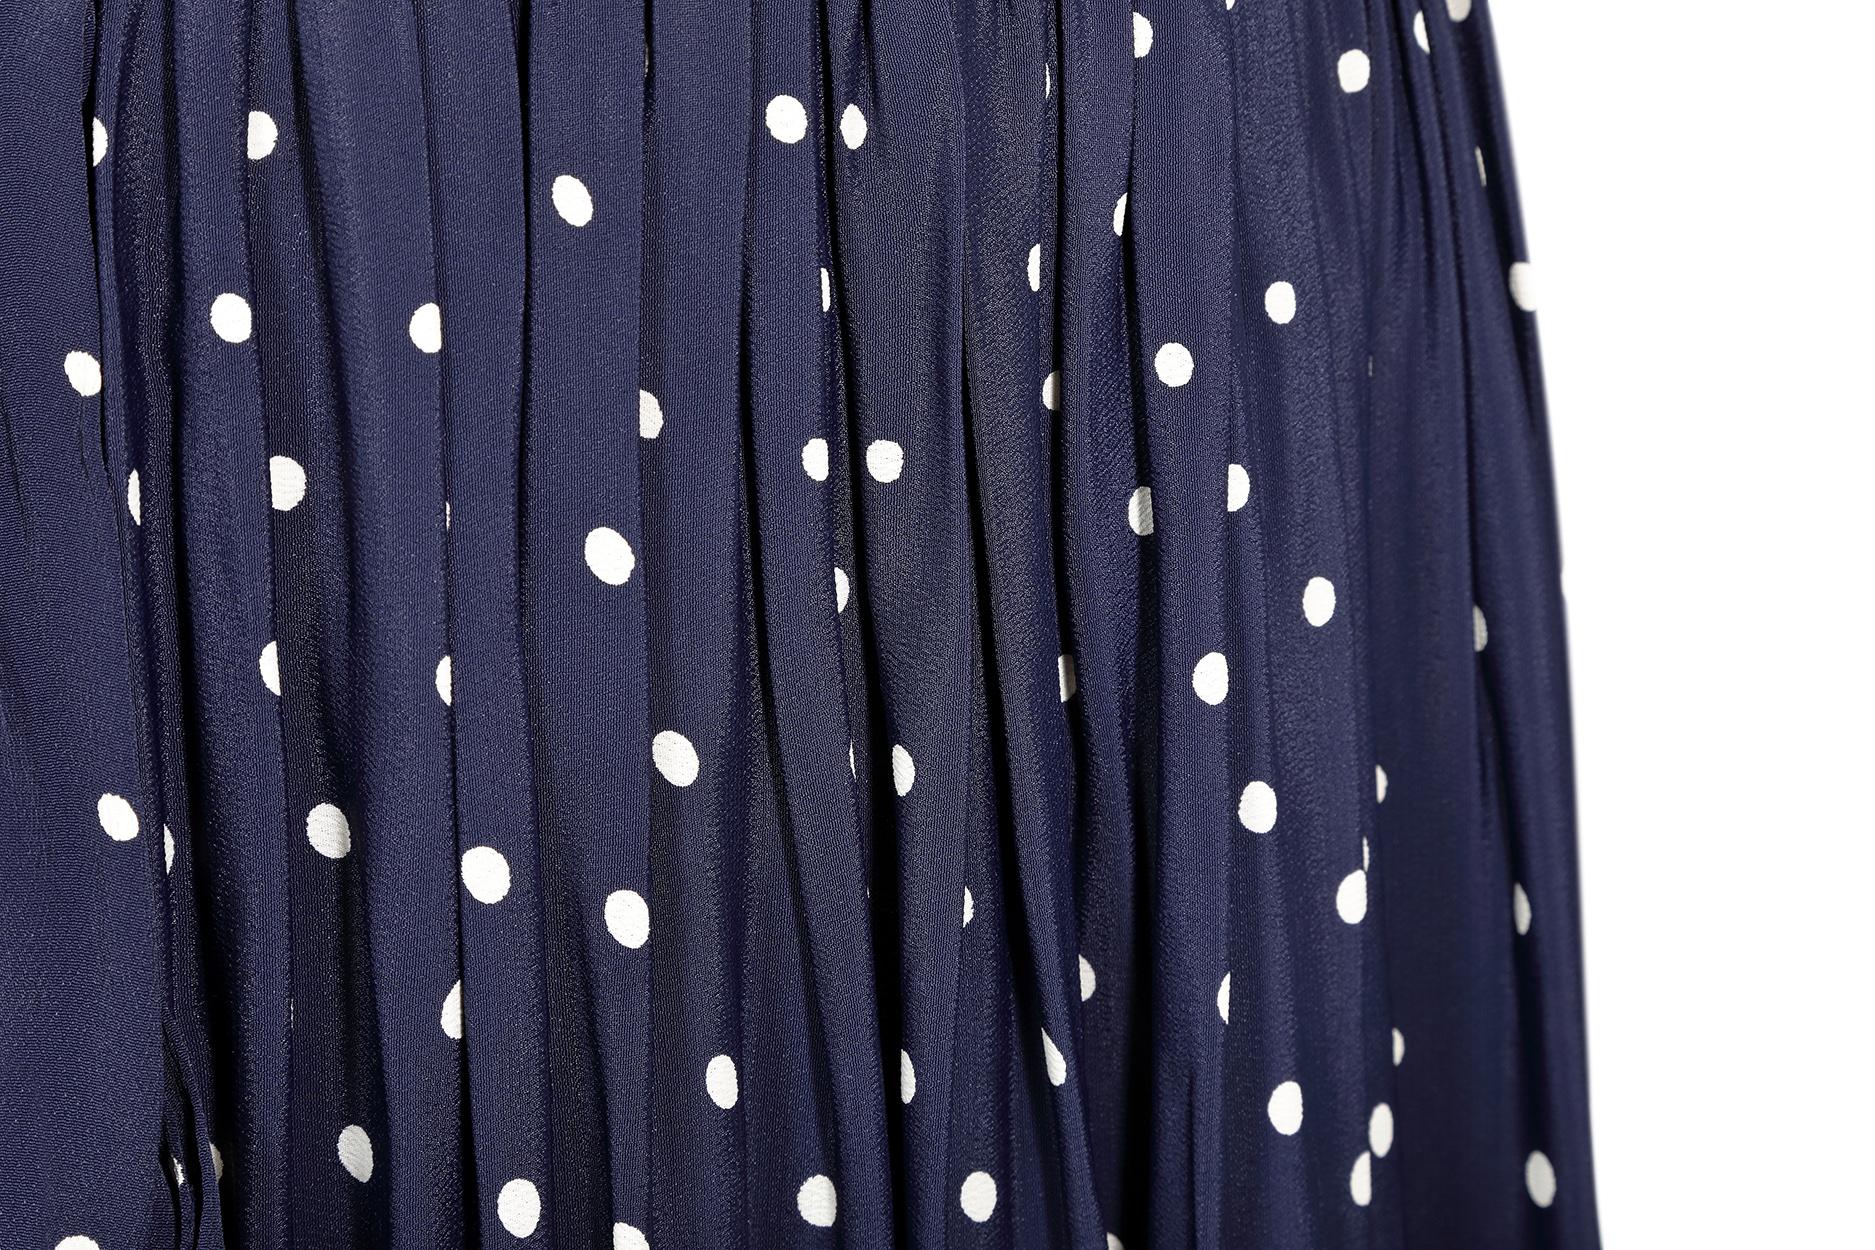 1940s Navy And White Polkadot Dress With Belt In Excellent Condition For Sale In London, GB